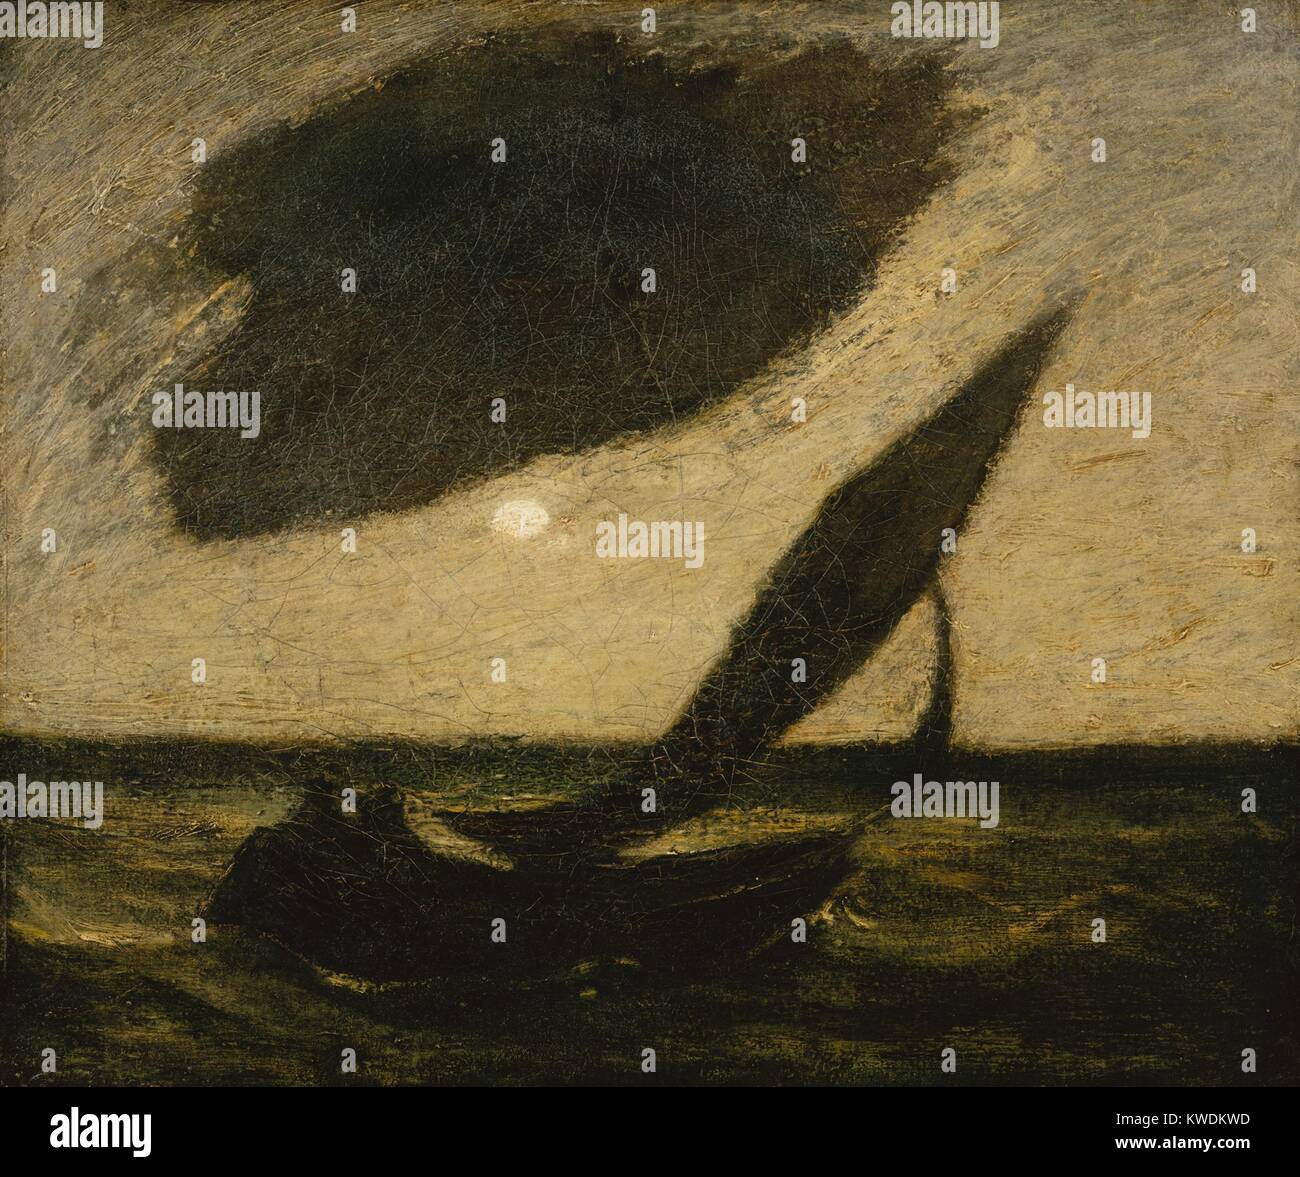 UNDER A CLOUD, by Albert Pinkham Ryder, 1900, American painting, oil on canvas. This evocative nocturnal seascape depicts a large dark cloud next to a small full moon over a sailboat the water (BSLOC 2017 9 34) Stock Photo